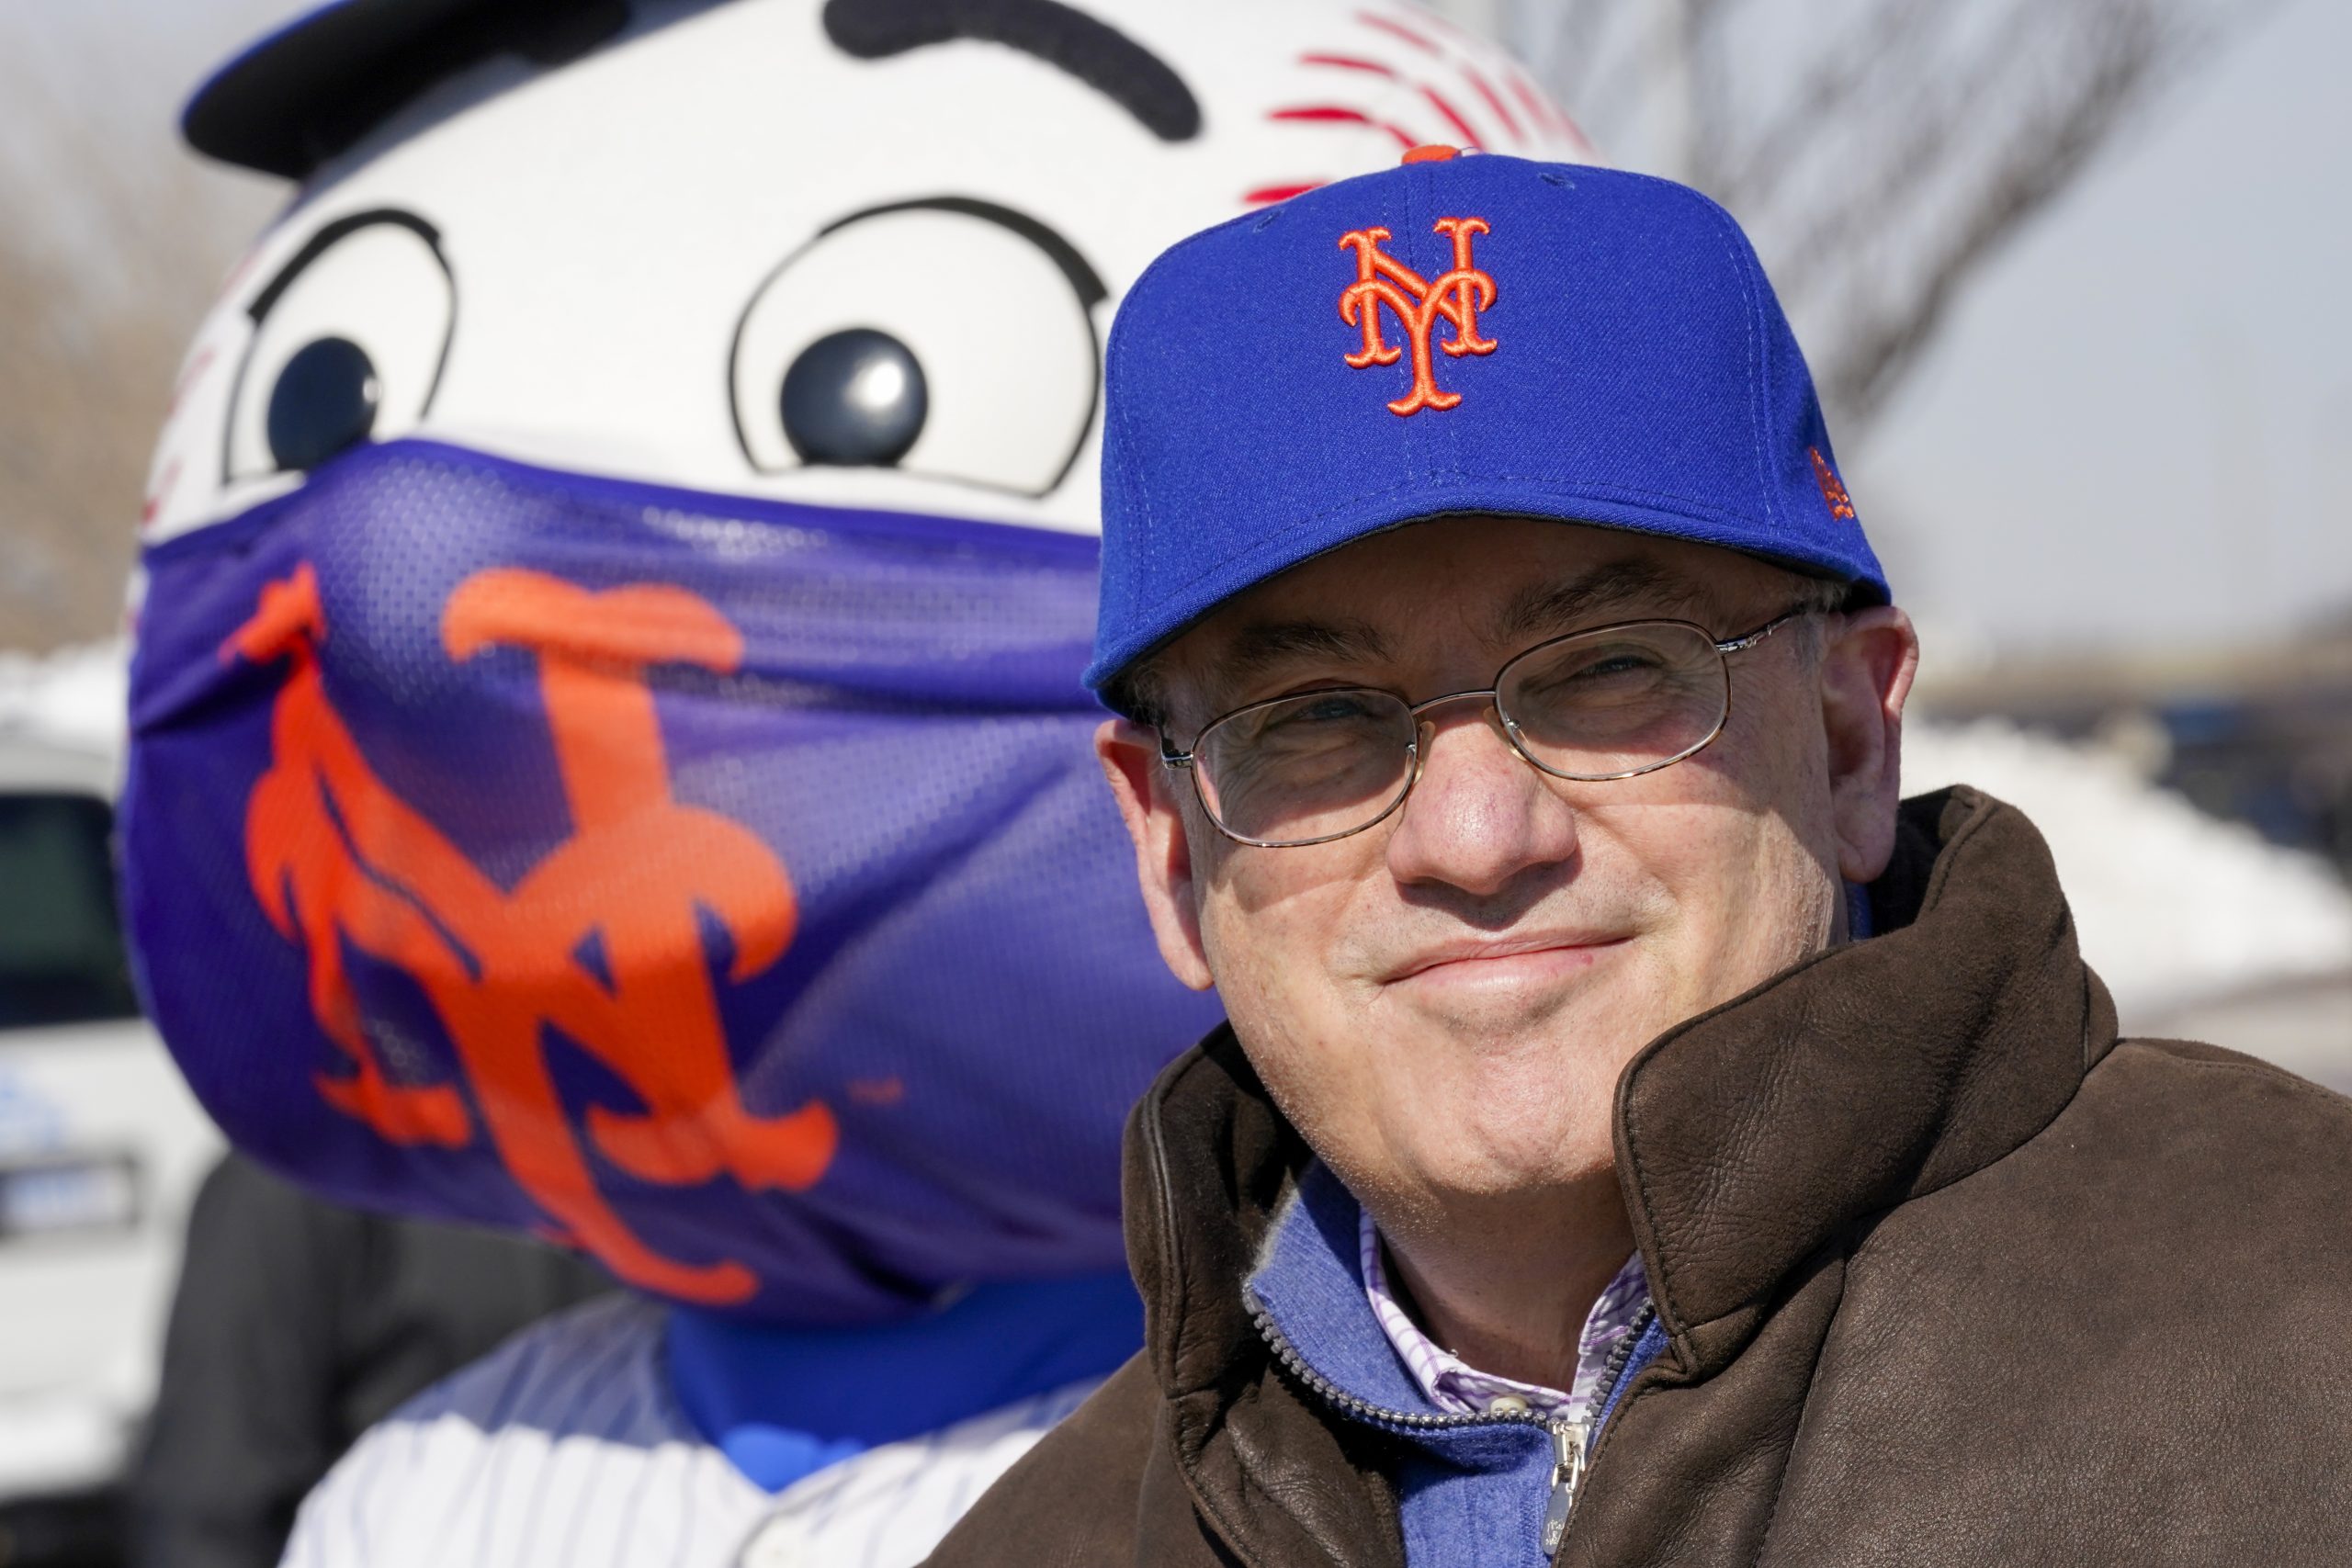 New York Mets GM Zack Scott reportedly attending a fundraiser at owner Steve Cohen's house hours before he was booked on a DUI in New York